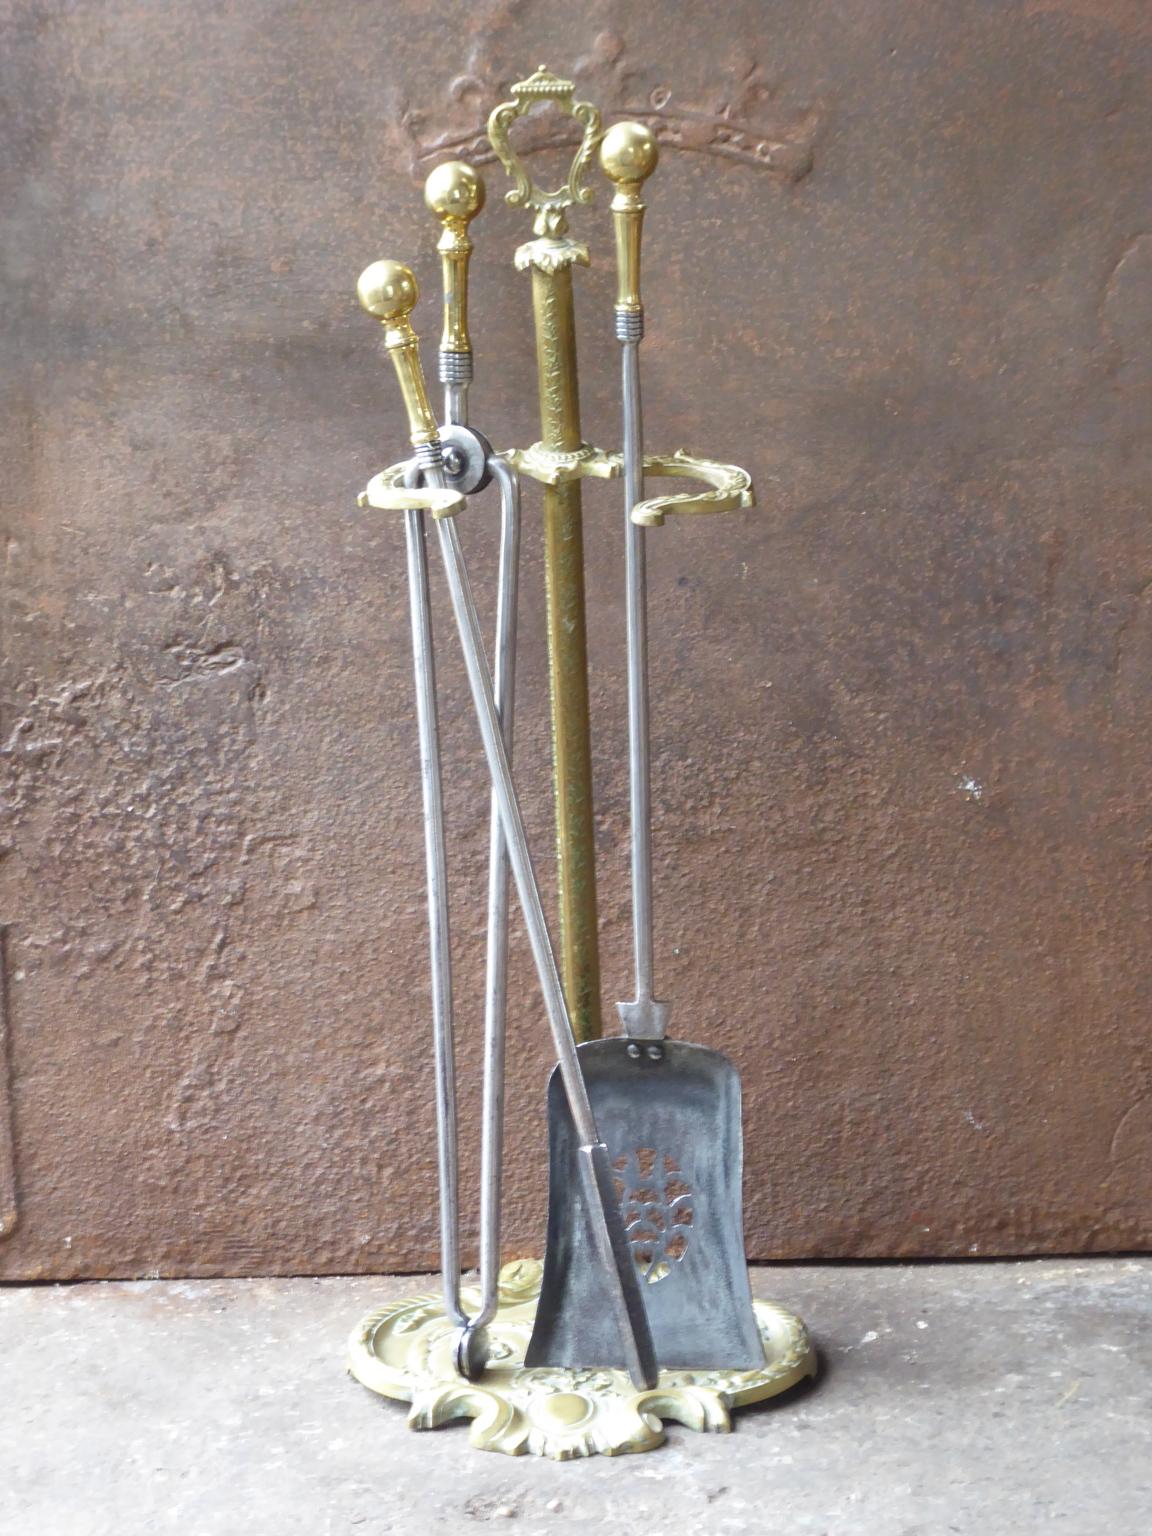 English set of three fireplace tools and a stand made of polished steel and brass. The fire tool set is in a good condition and is fully functional. 19th century, Victorian.